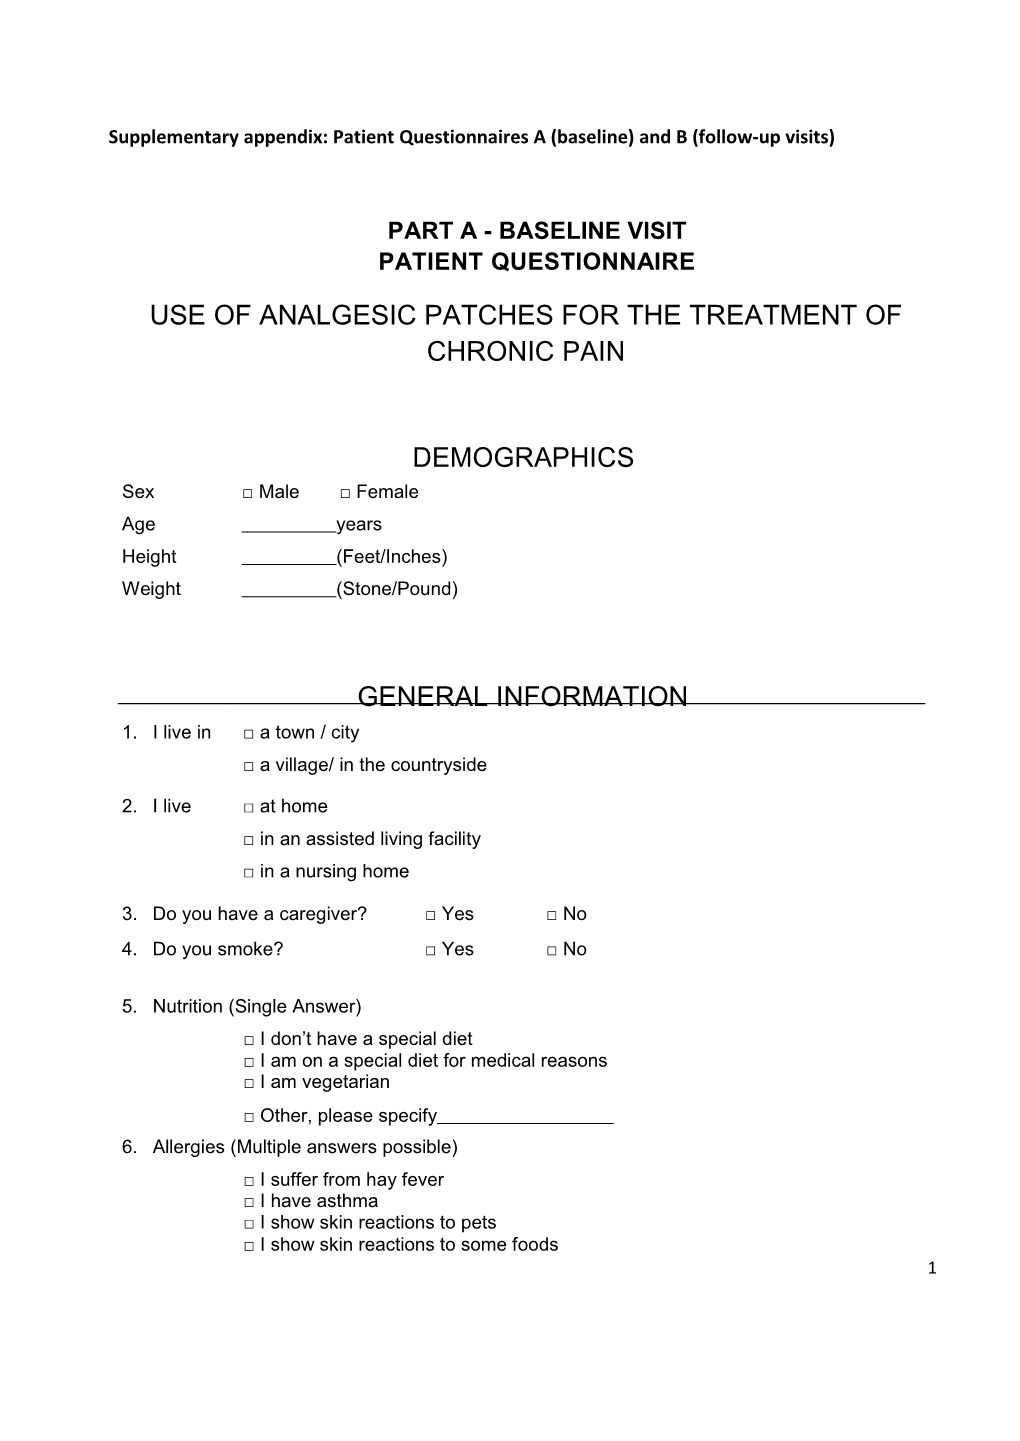 Supplementary Appendix: Patient Questionnaires a (Baseline) and B (Follow-Up Visits)